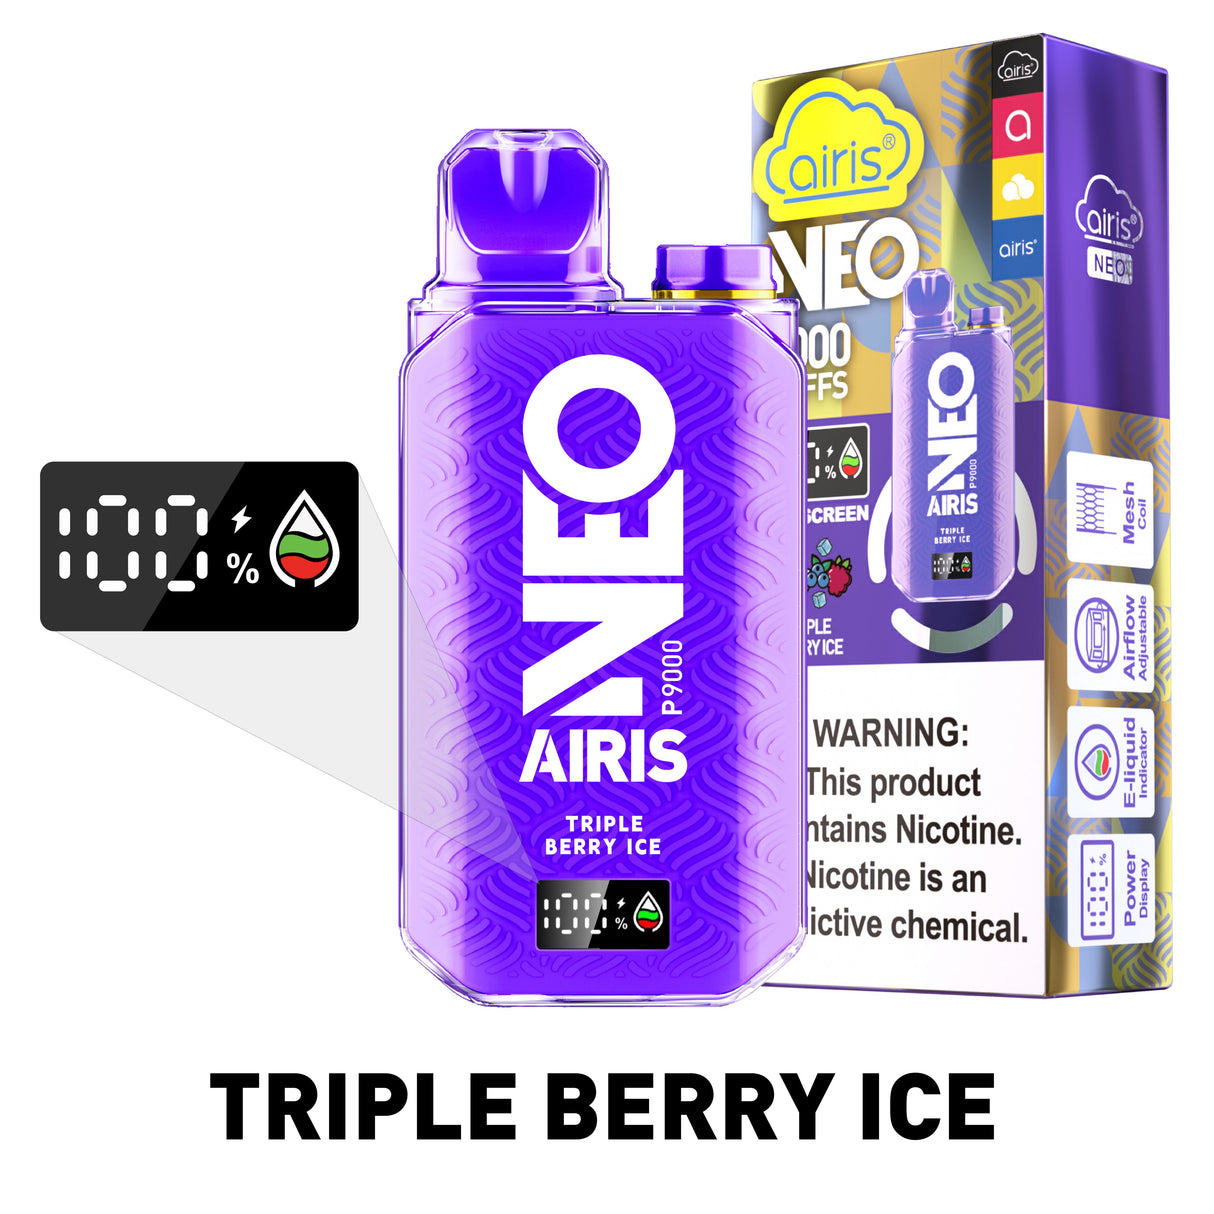 Airis Neo P9000 Rechargeable Disposable – 9000 Puffs [BUY 10 BOXES GET 2 FREE] Airis Airis Neo P9000 Rechargeable Disposable – 9000 Puffs [BUY 10 BOXES GET 2 FREE]